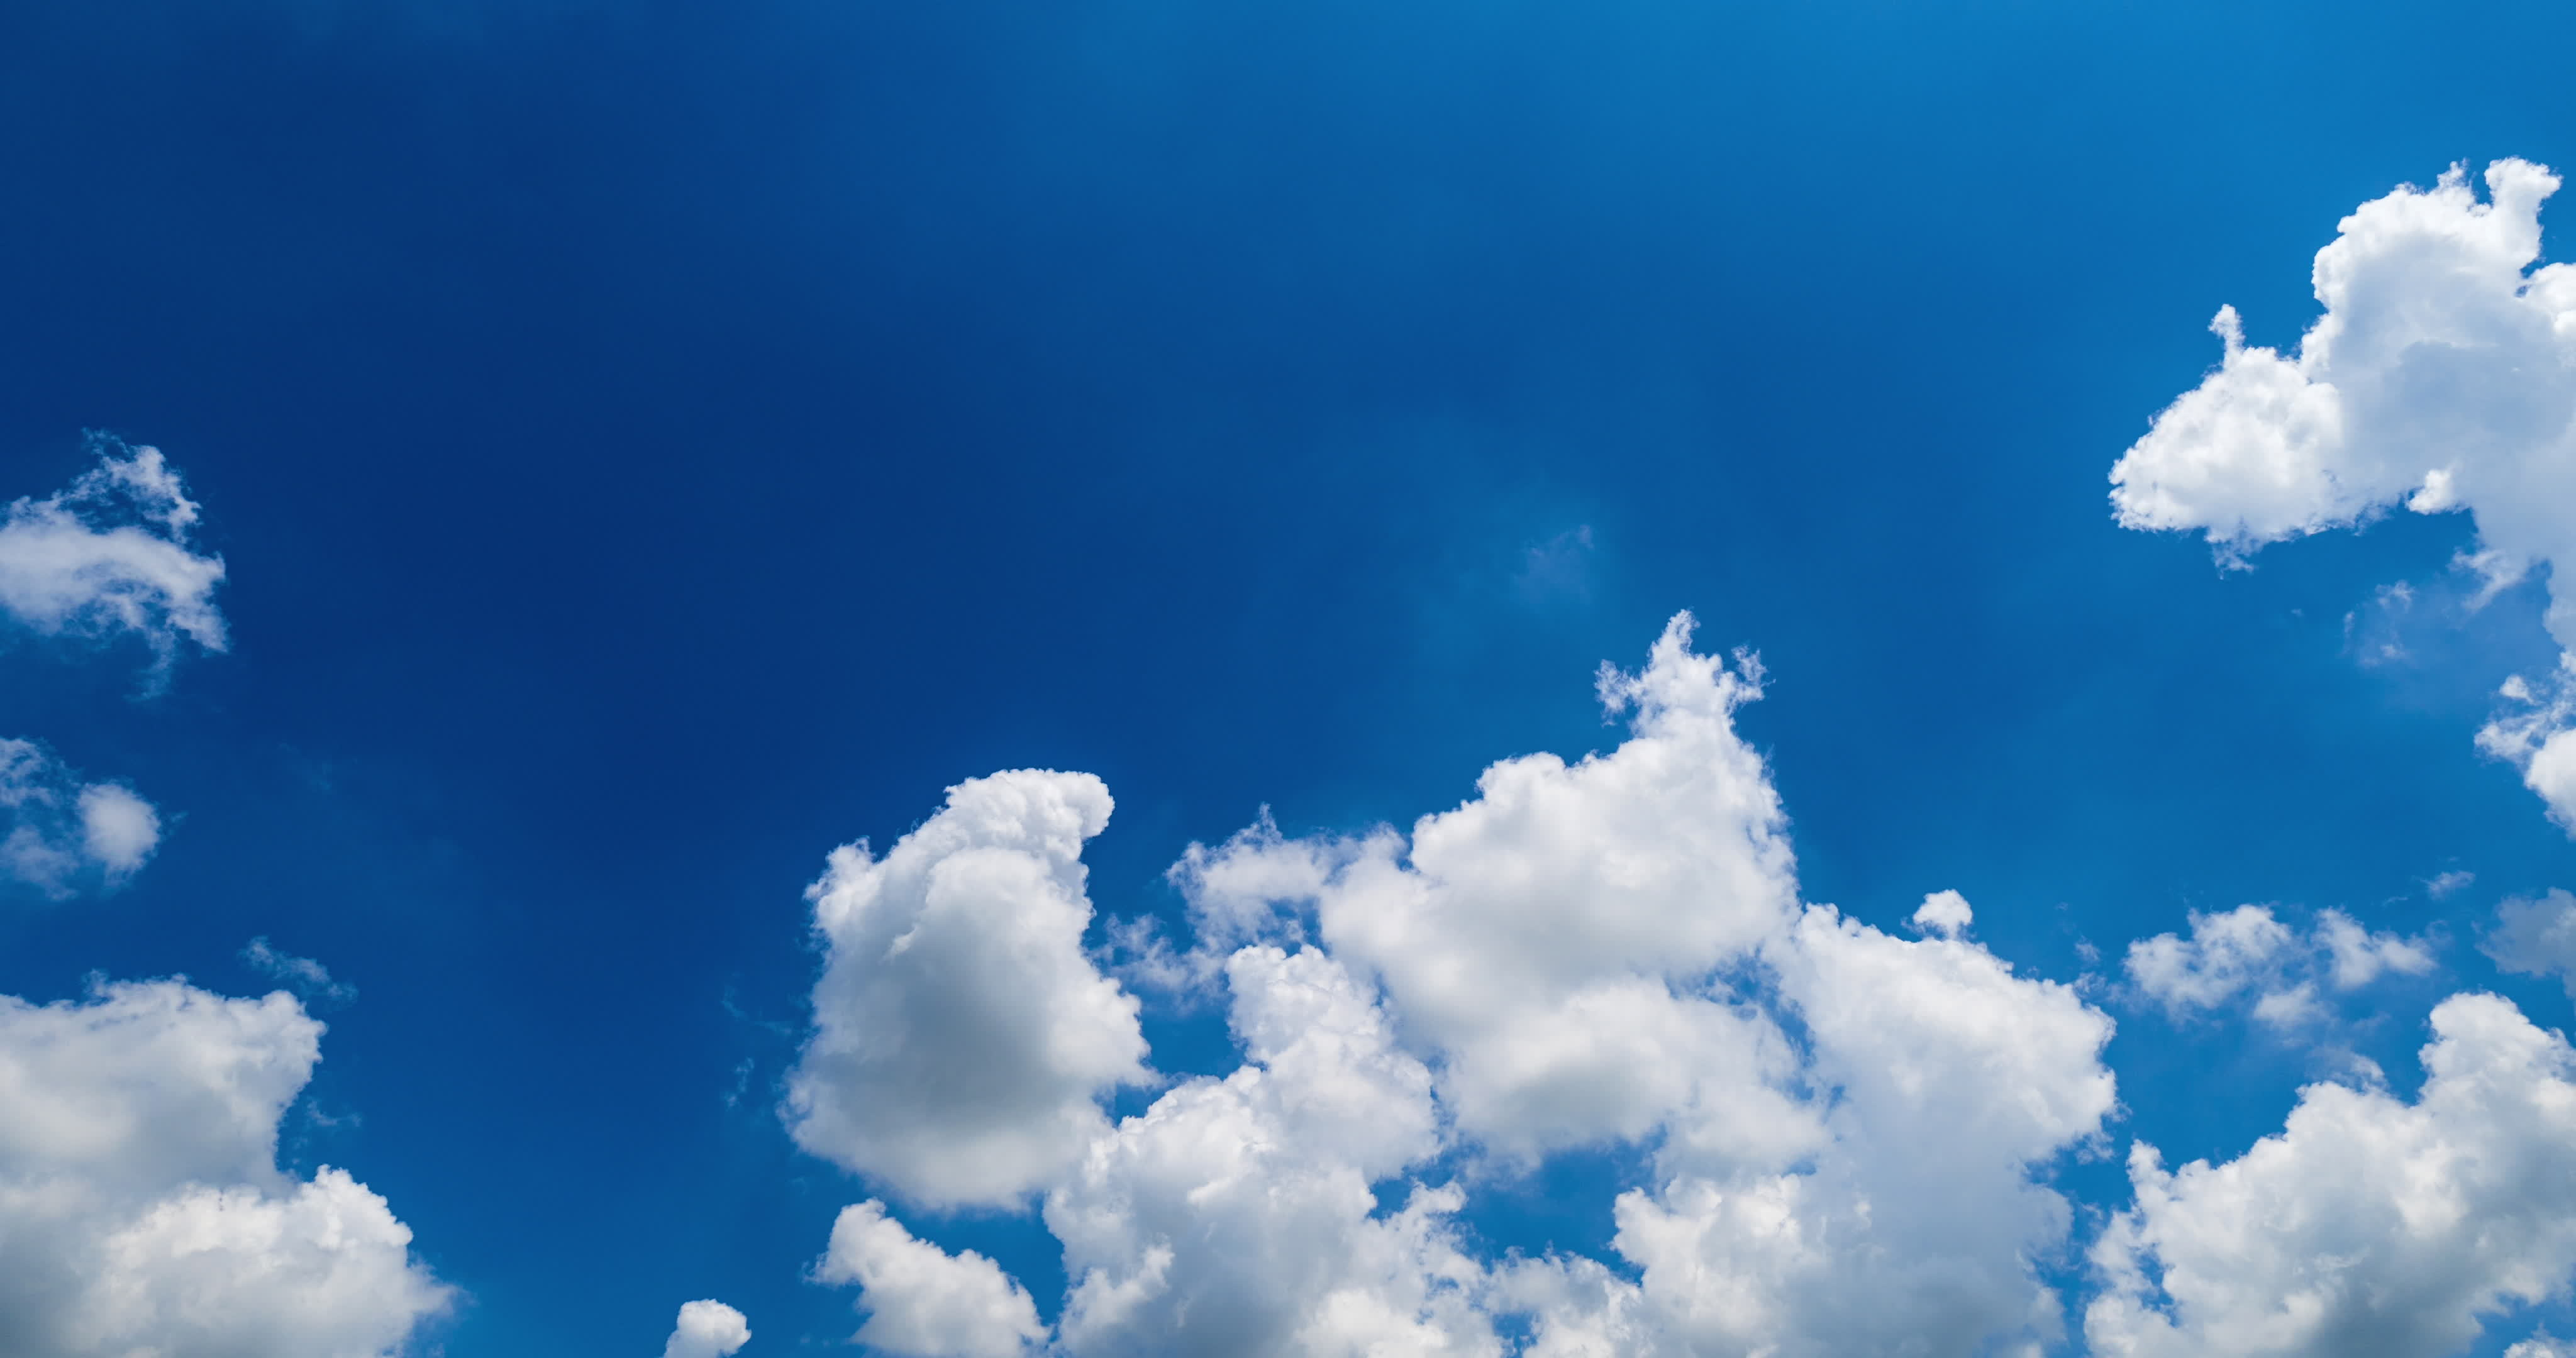 Clouds Background Hd  Sky Hd Images Png  1920x1080 Wallpaper  teahubio